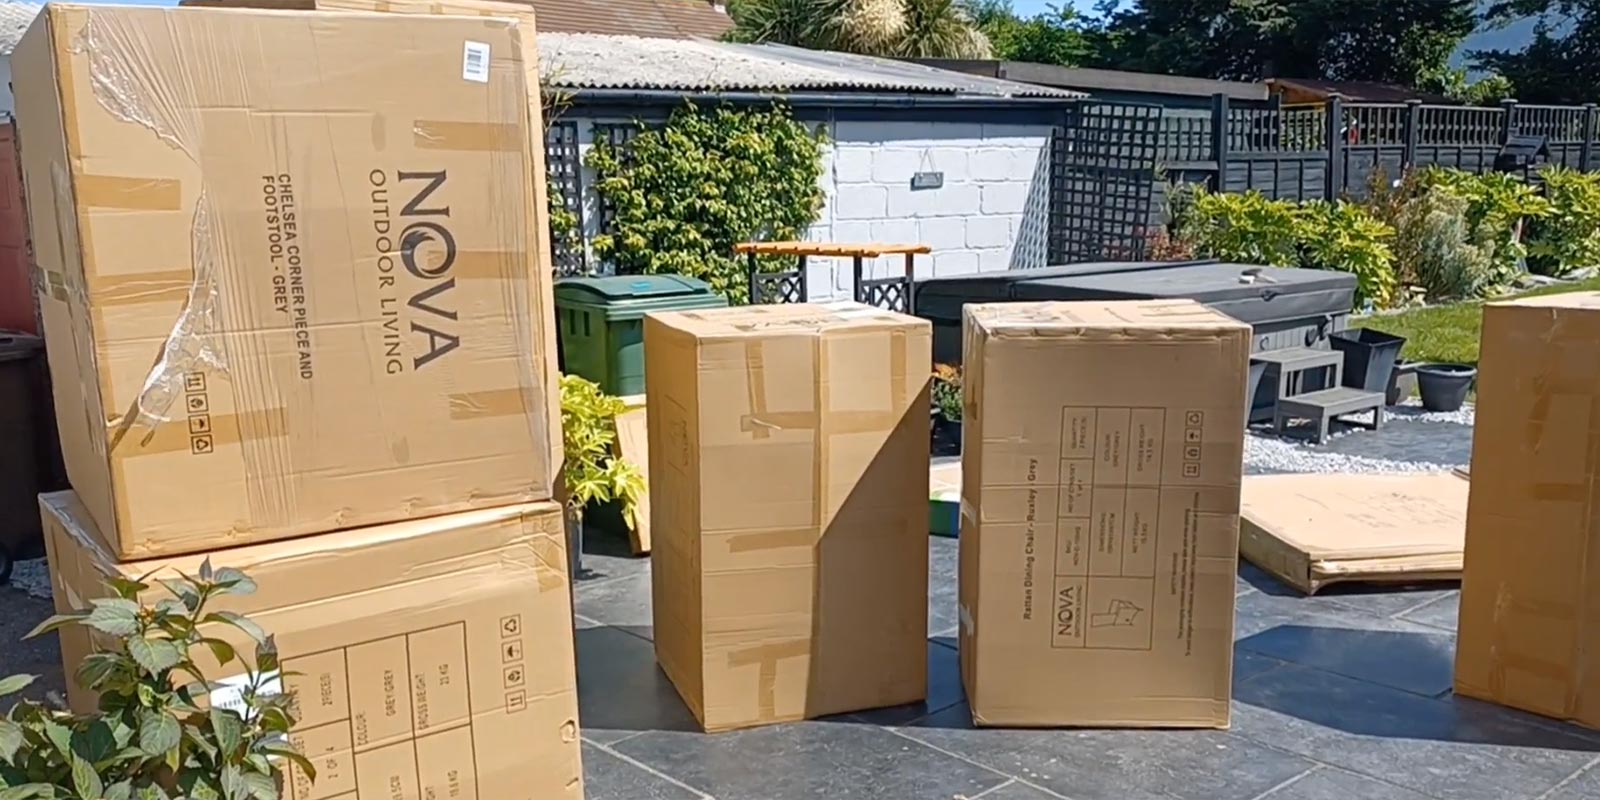 Re-Use Your Garden Furniture Cardboard Delivery Boxes